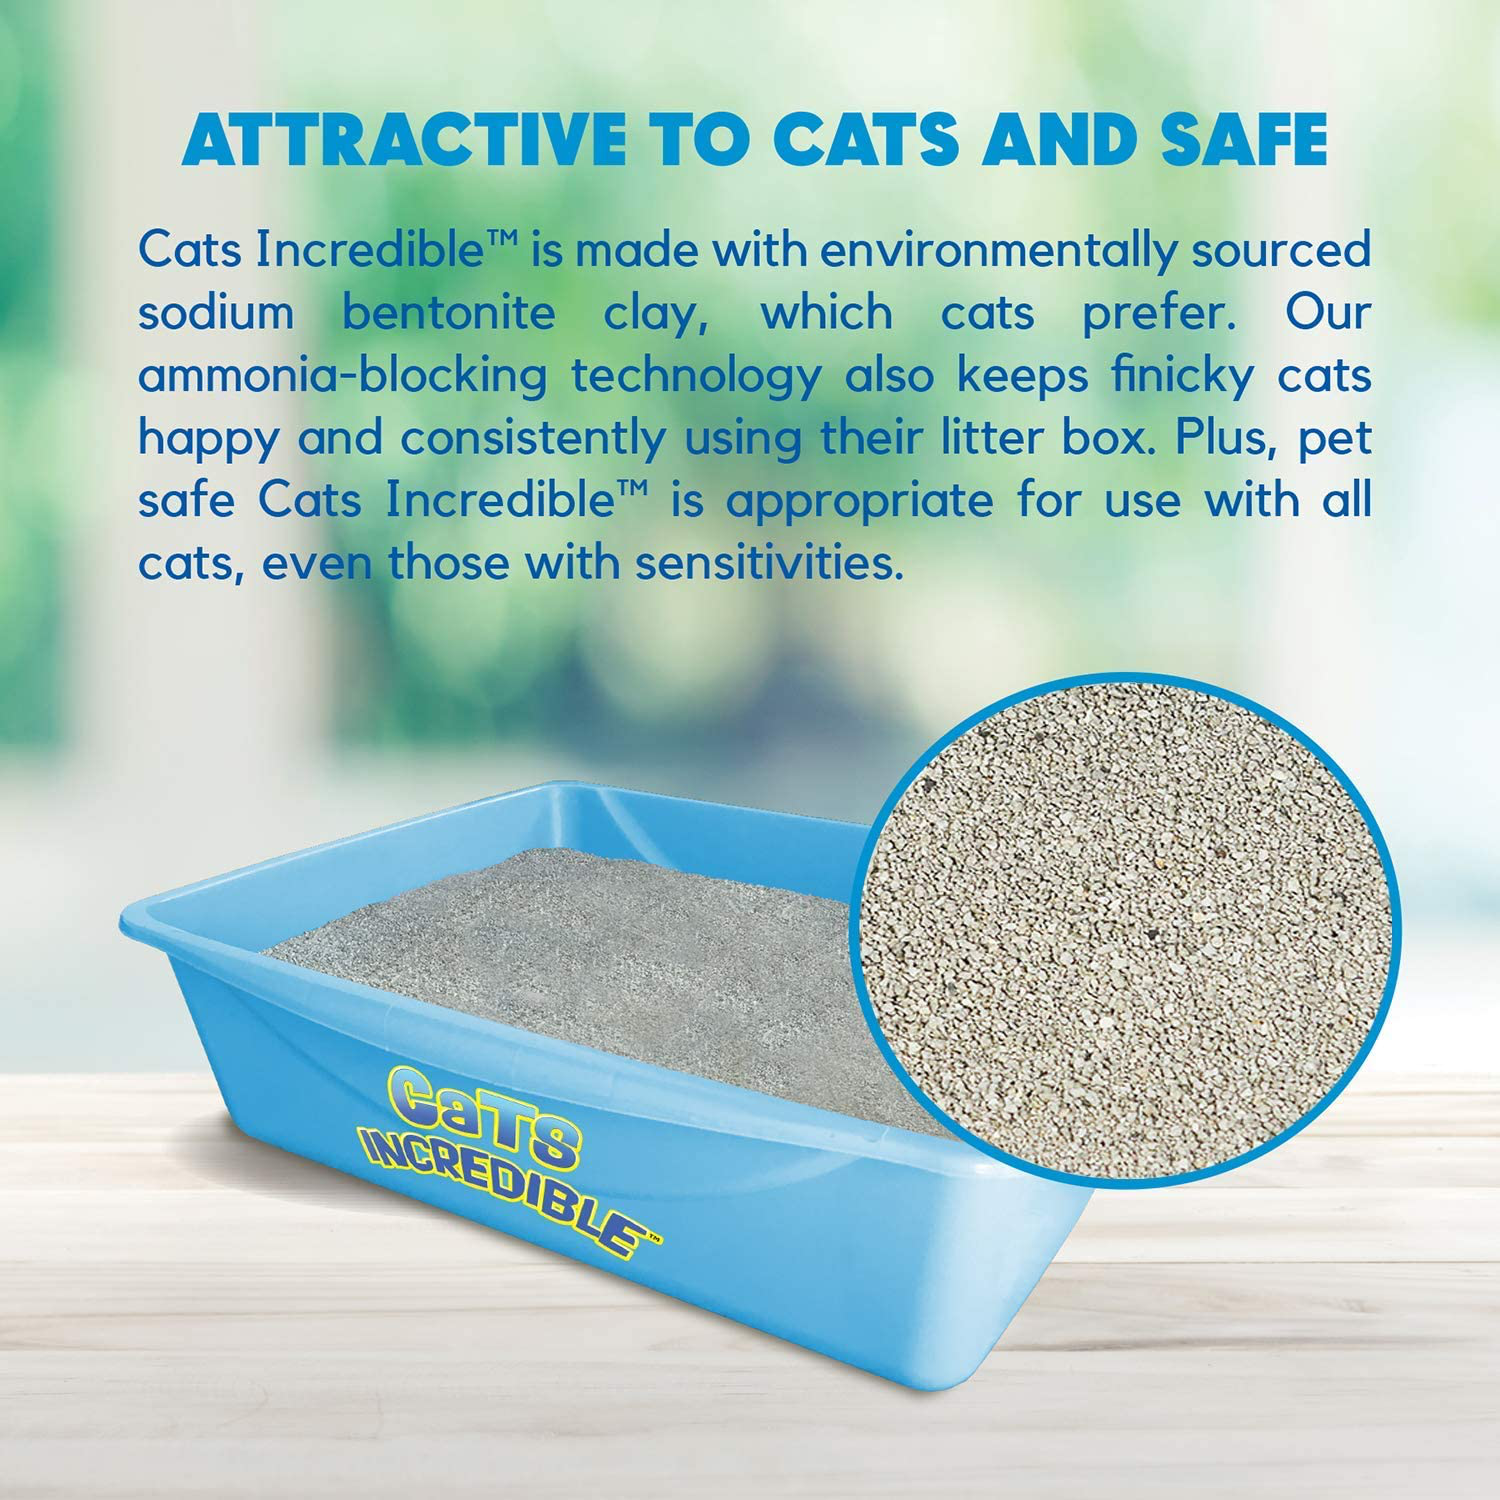 Lucy Pet Cats Incredible Clumping Cat Litter with Smell Squasher, Absorbent Natural Clay Formula Prevents Ammonia Build-Up